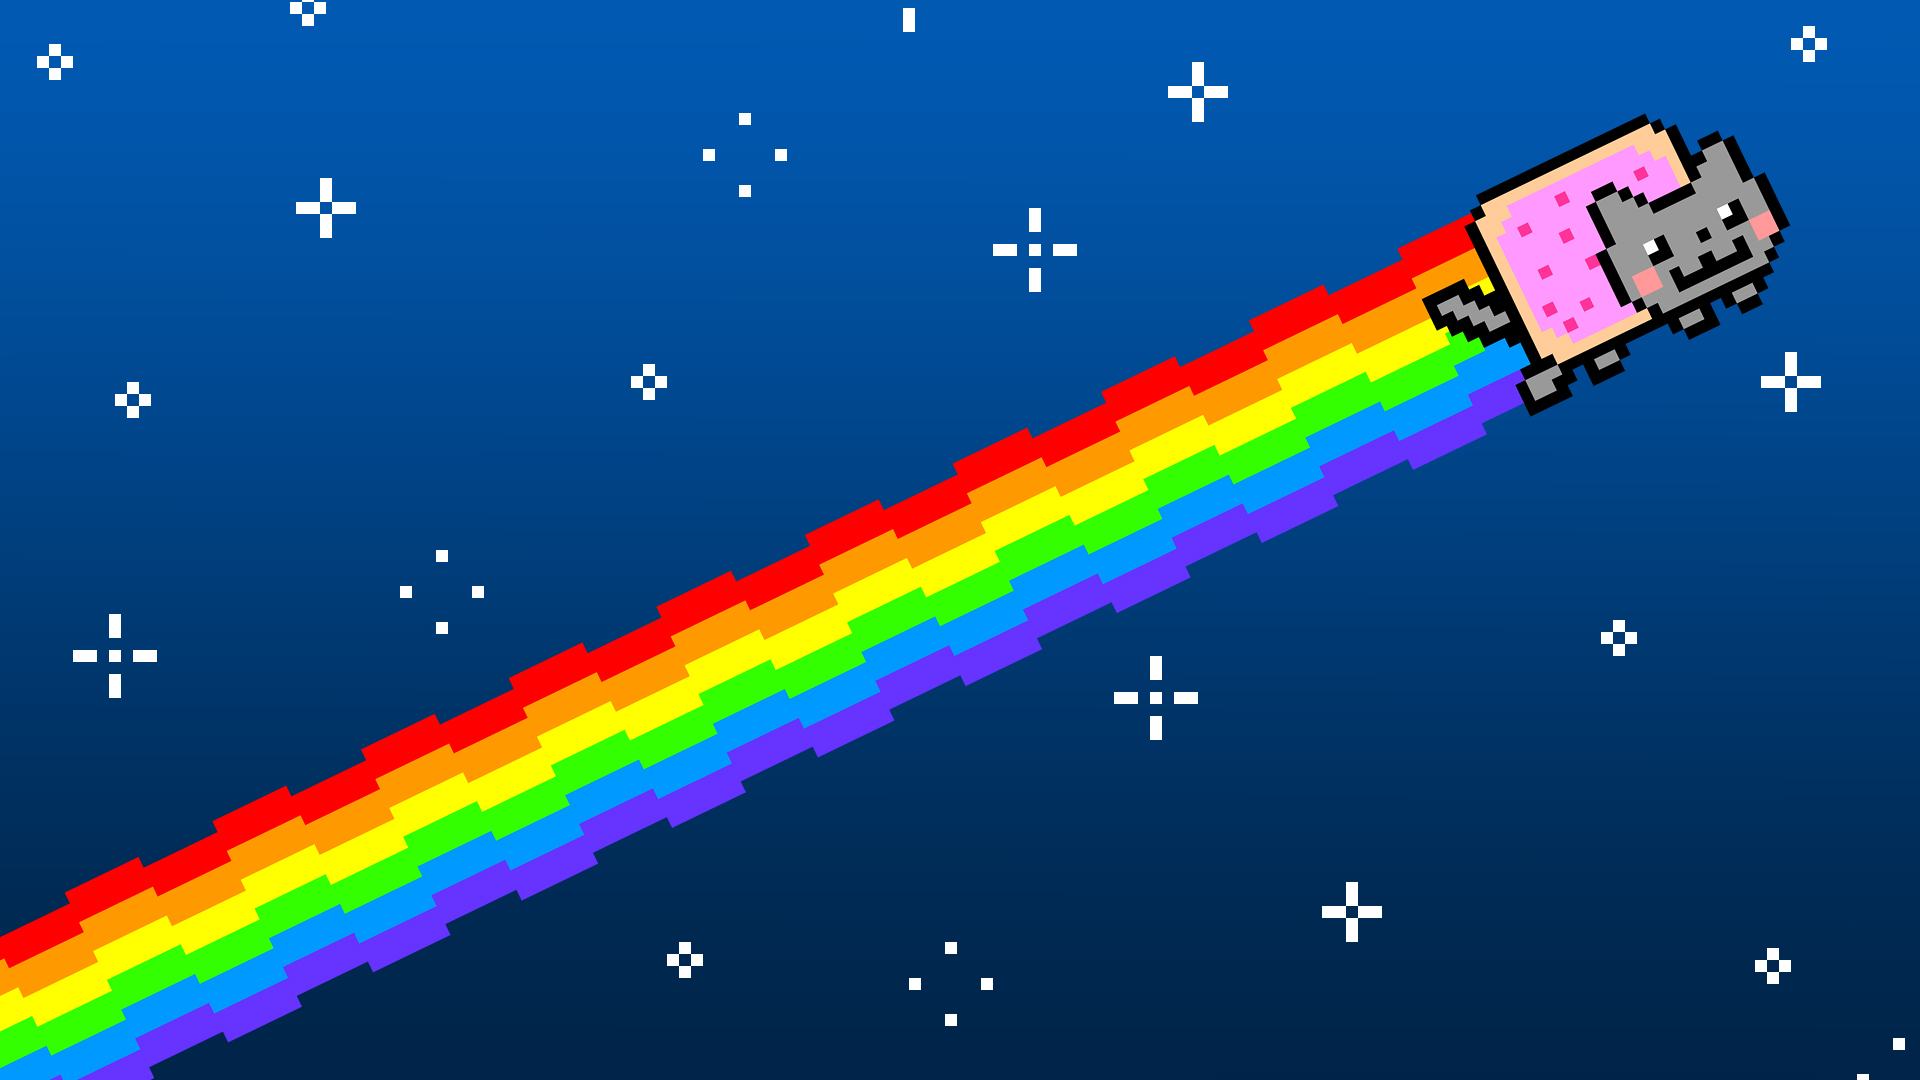 Nyan Cat Wallpapers Free Download | HD Wallpapers, Backgrounds, Images, Art Photos.